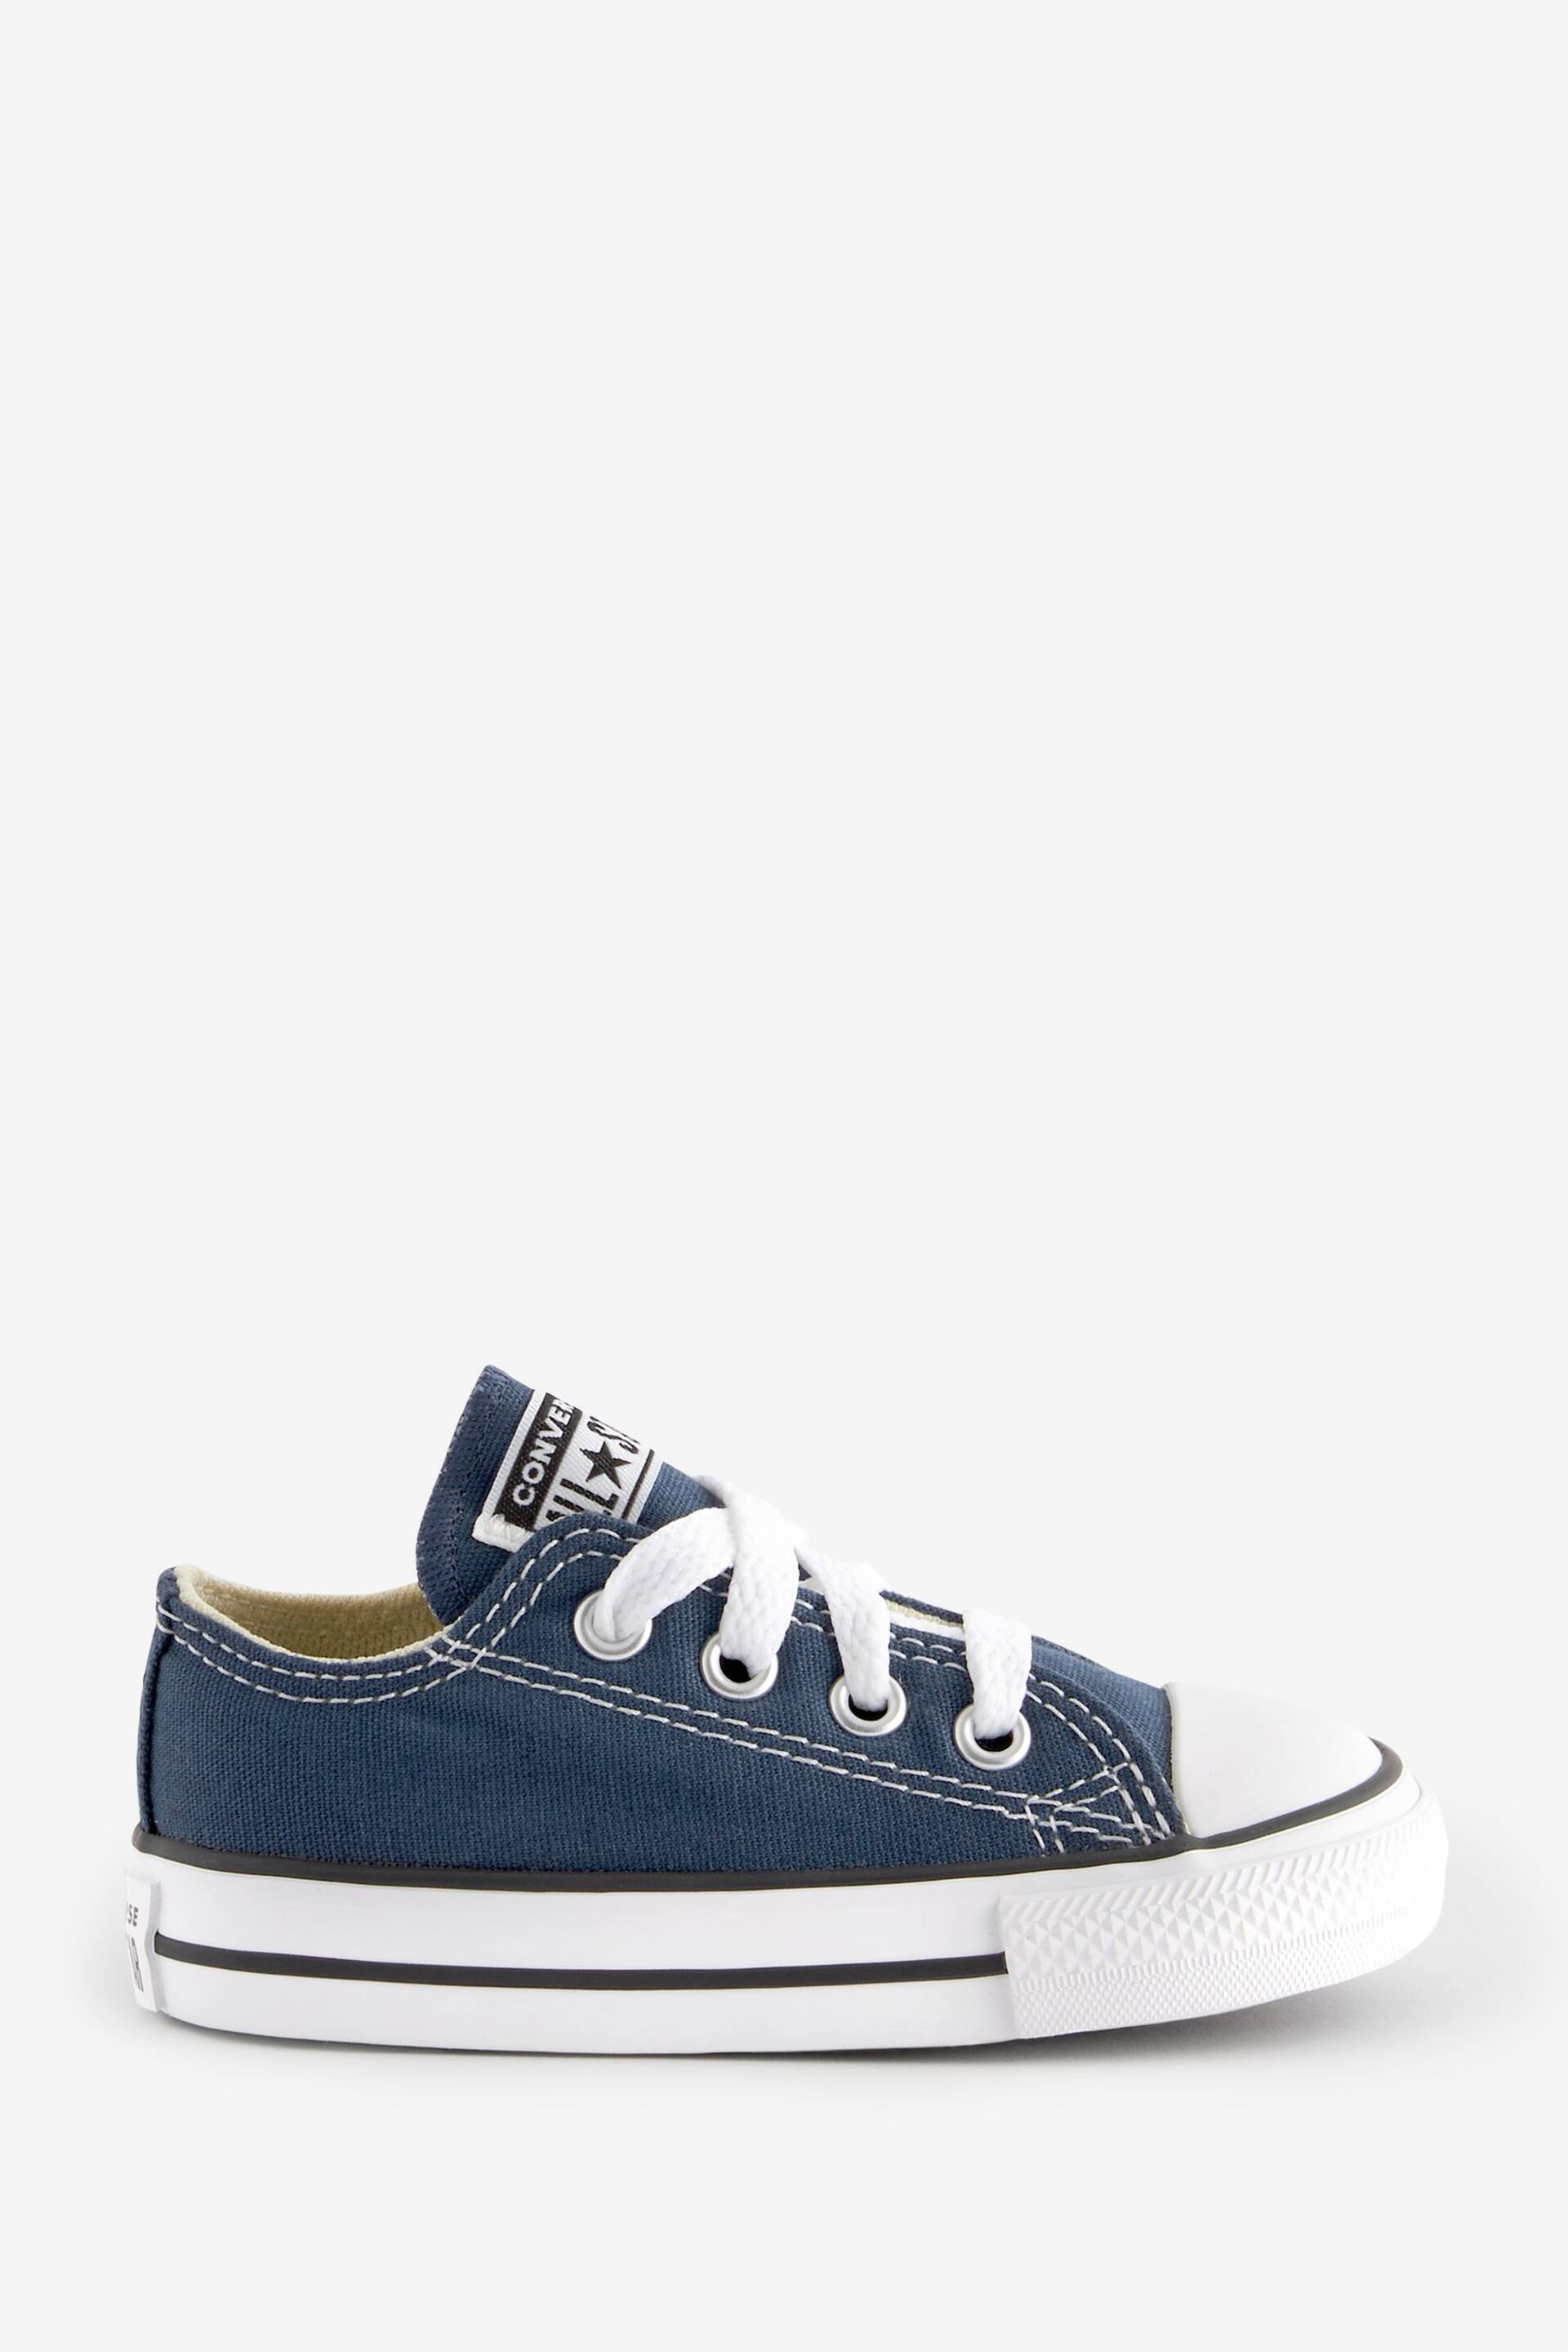 Converse Navy Chuck Taylor All Star Trainers - Image 1 of 6